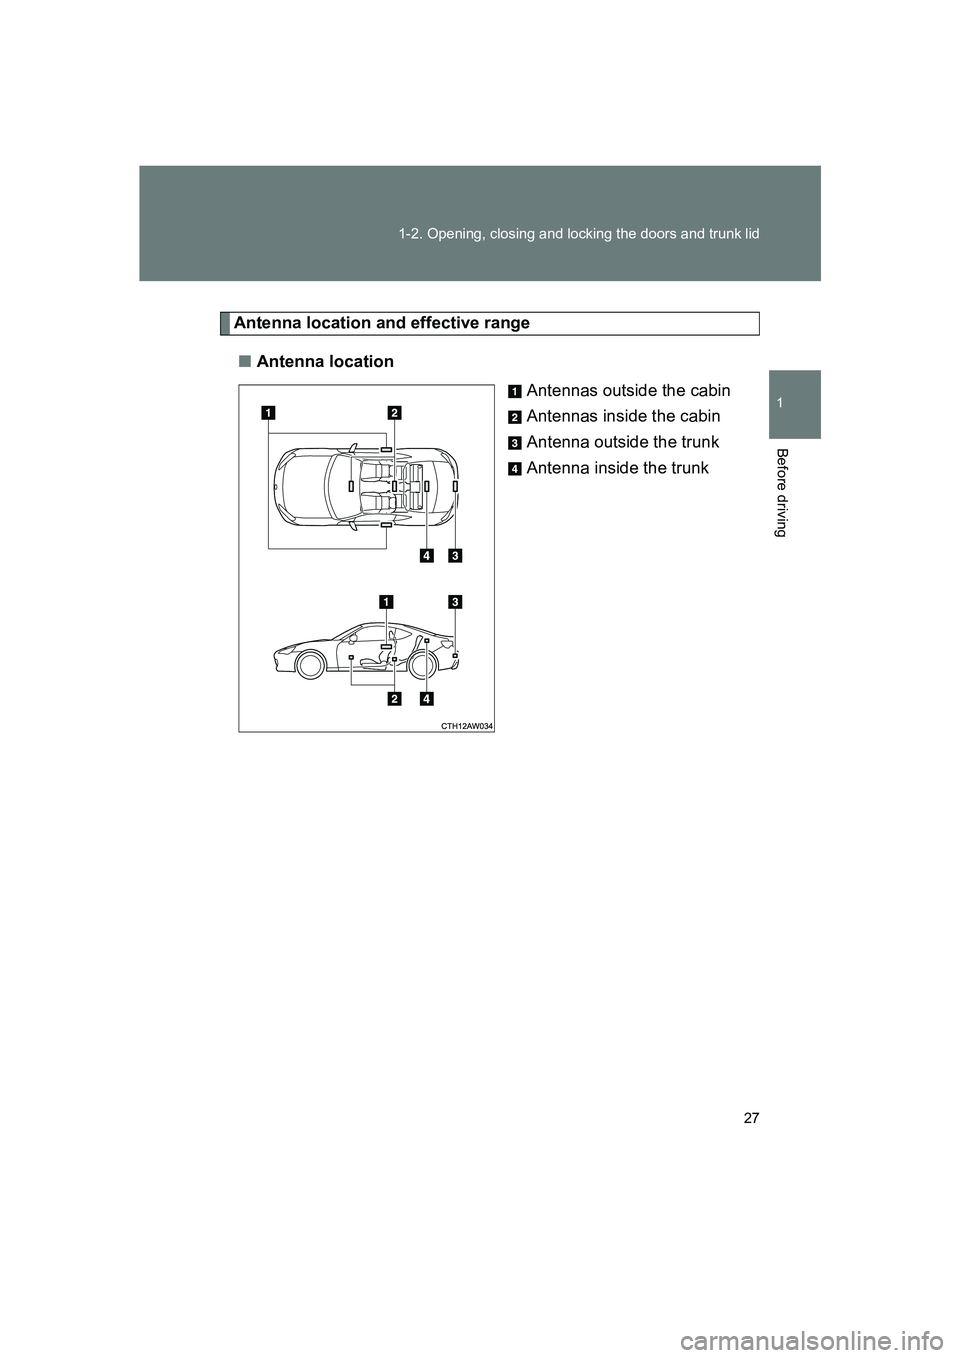 SUBARU BRZ 2019  Owners Manual 27
1-2. Opening, closing and locking the doors and trunk lid
1
Before driving
BRZ_U
Antenna location and effective range
■ Antenna location
Antennas outside the cabin
Antennas inside the cabin
Anten